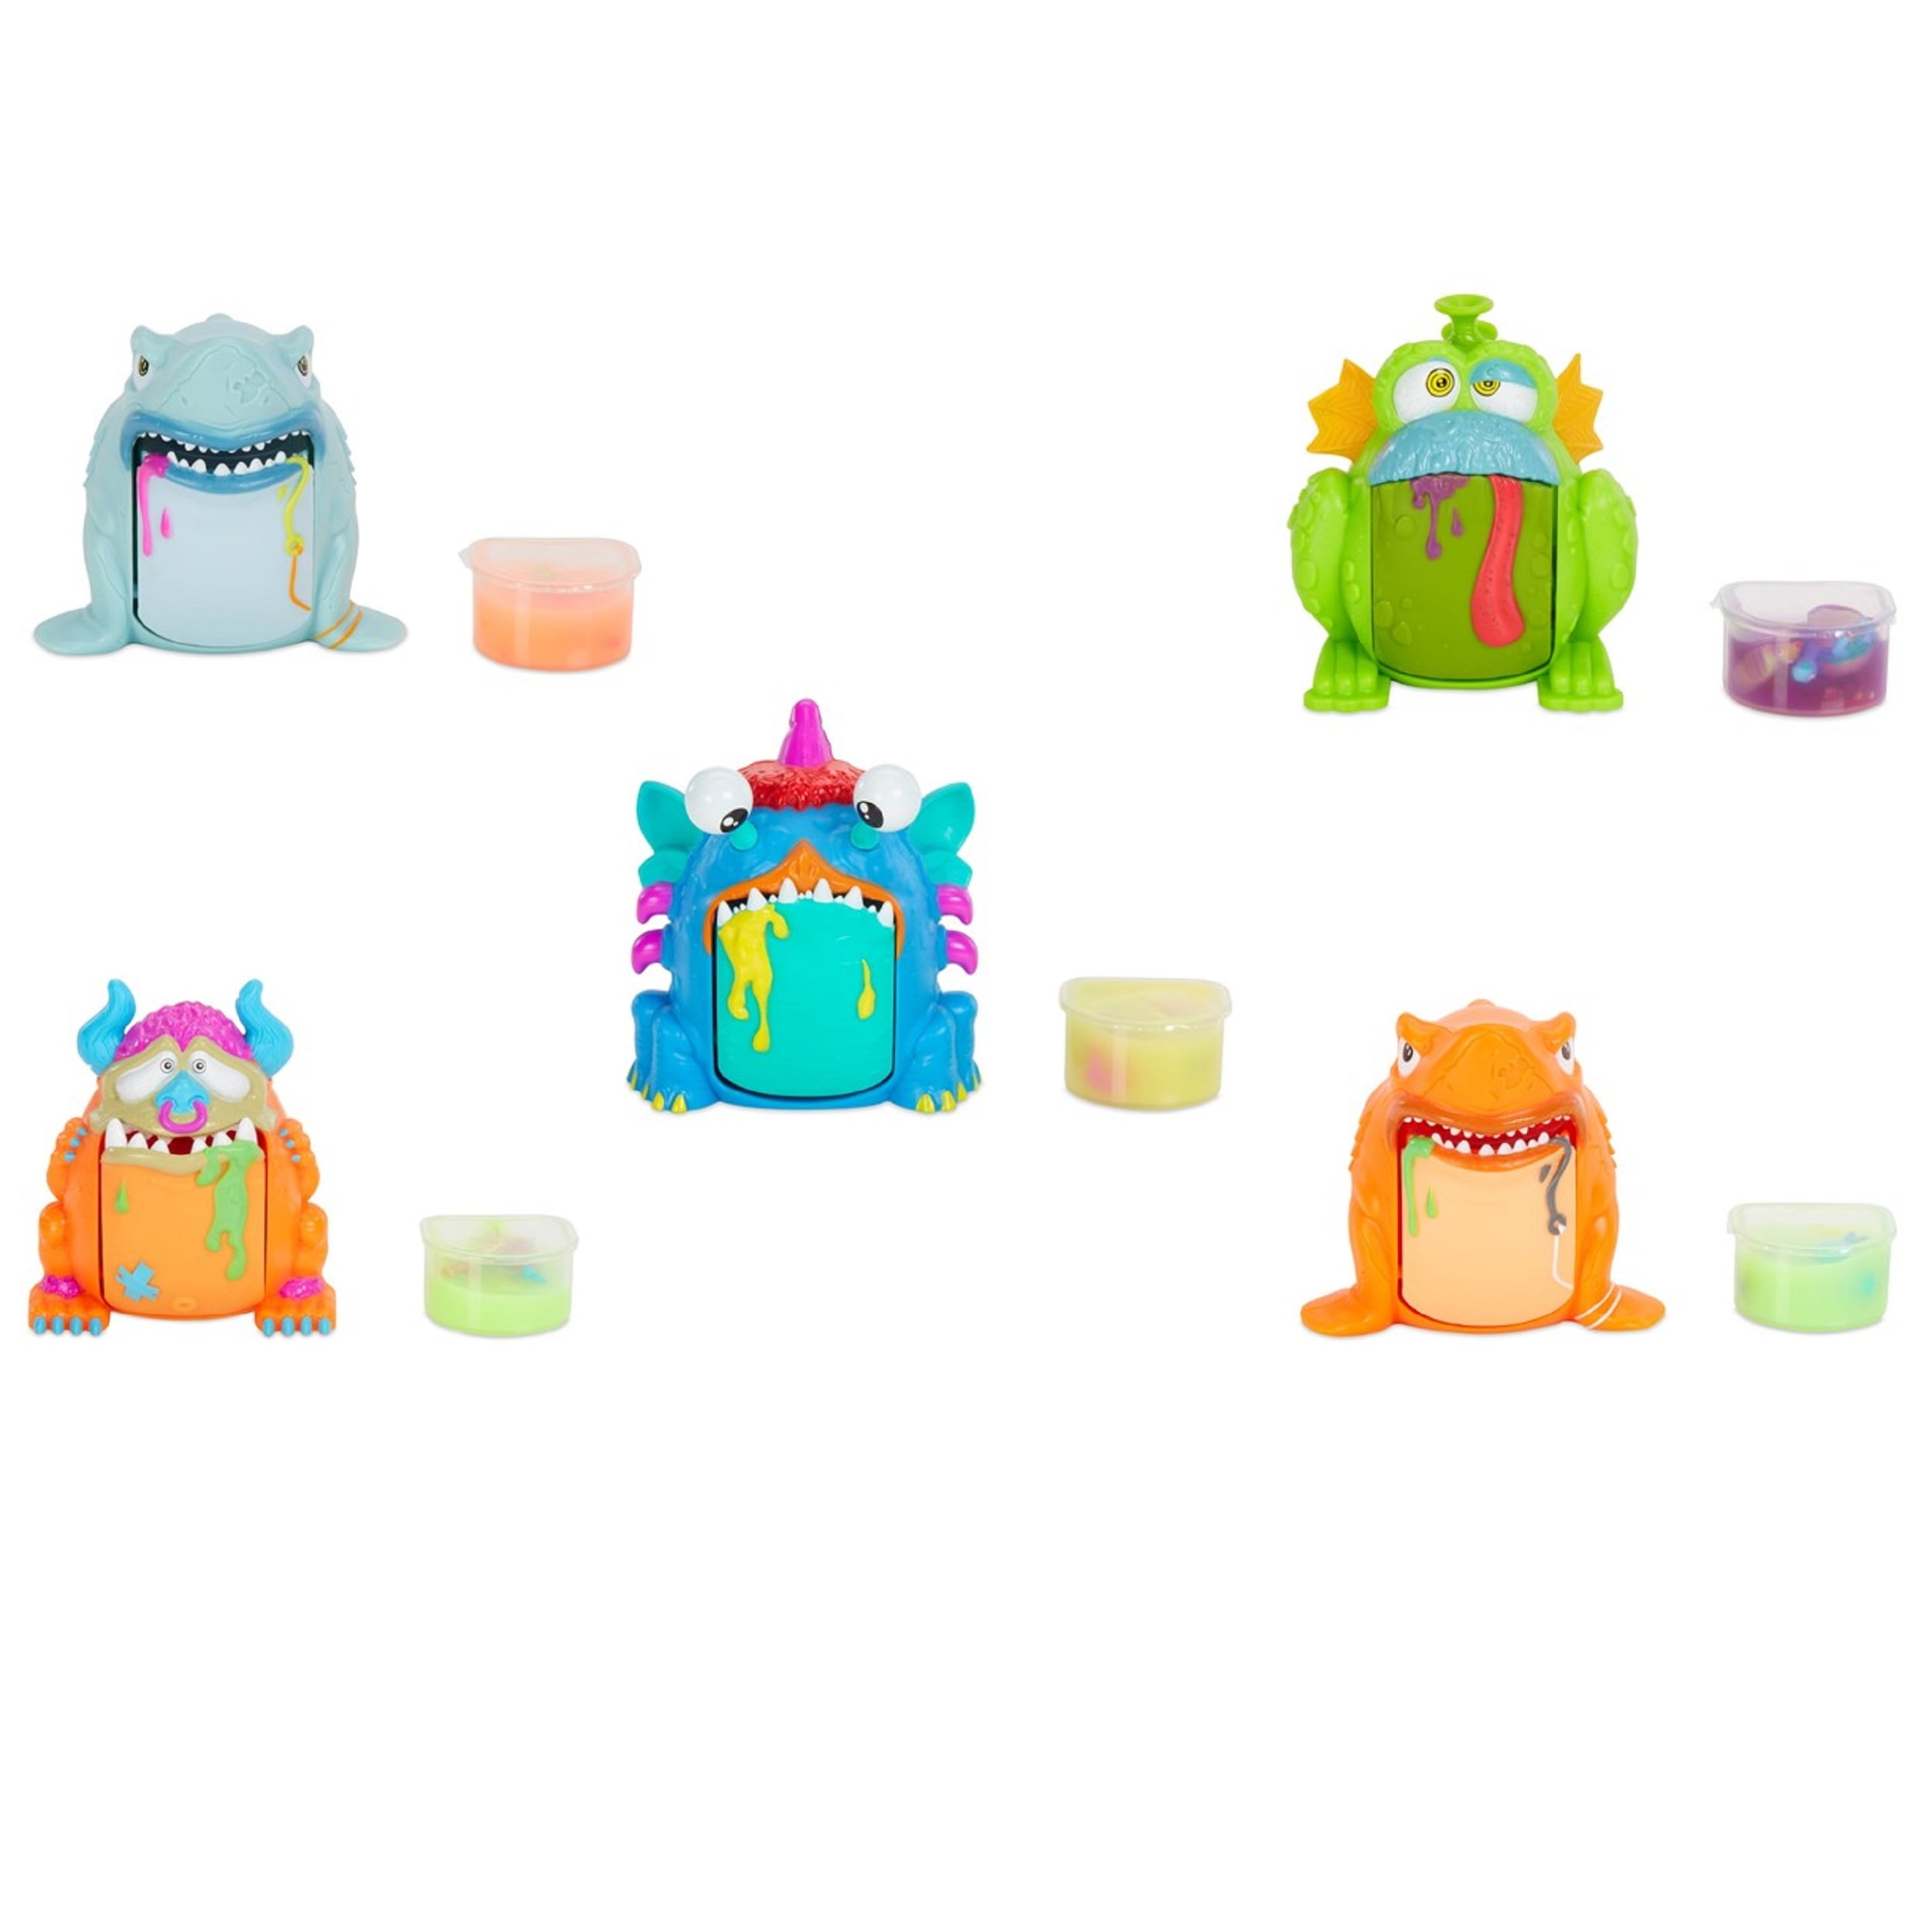 Crate créatures surprise GERBE Buddies Teal 3 PUKE Pals BARF Buddy Slime 